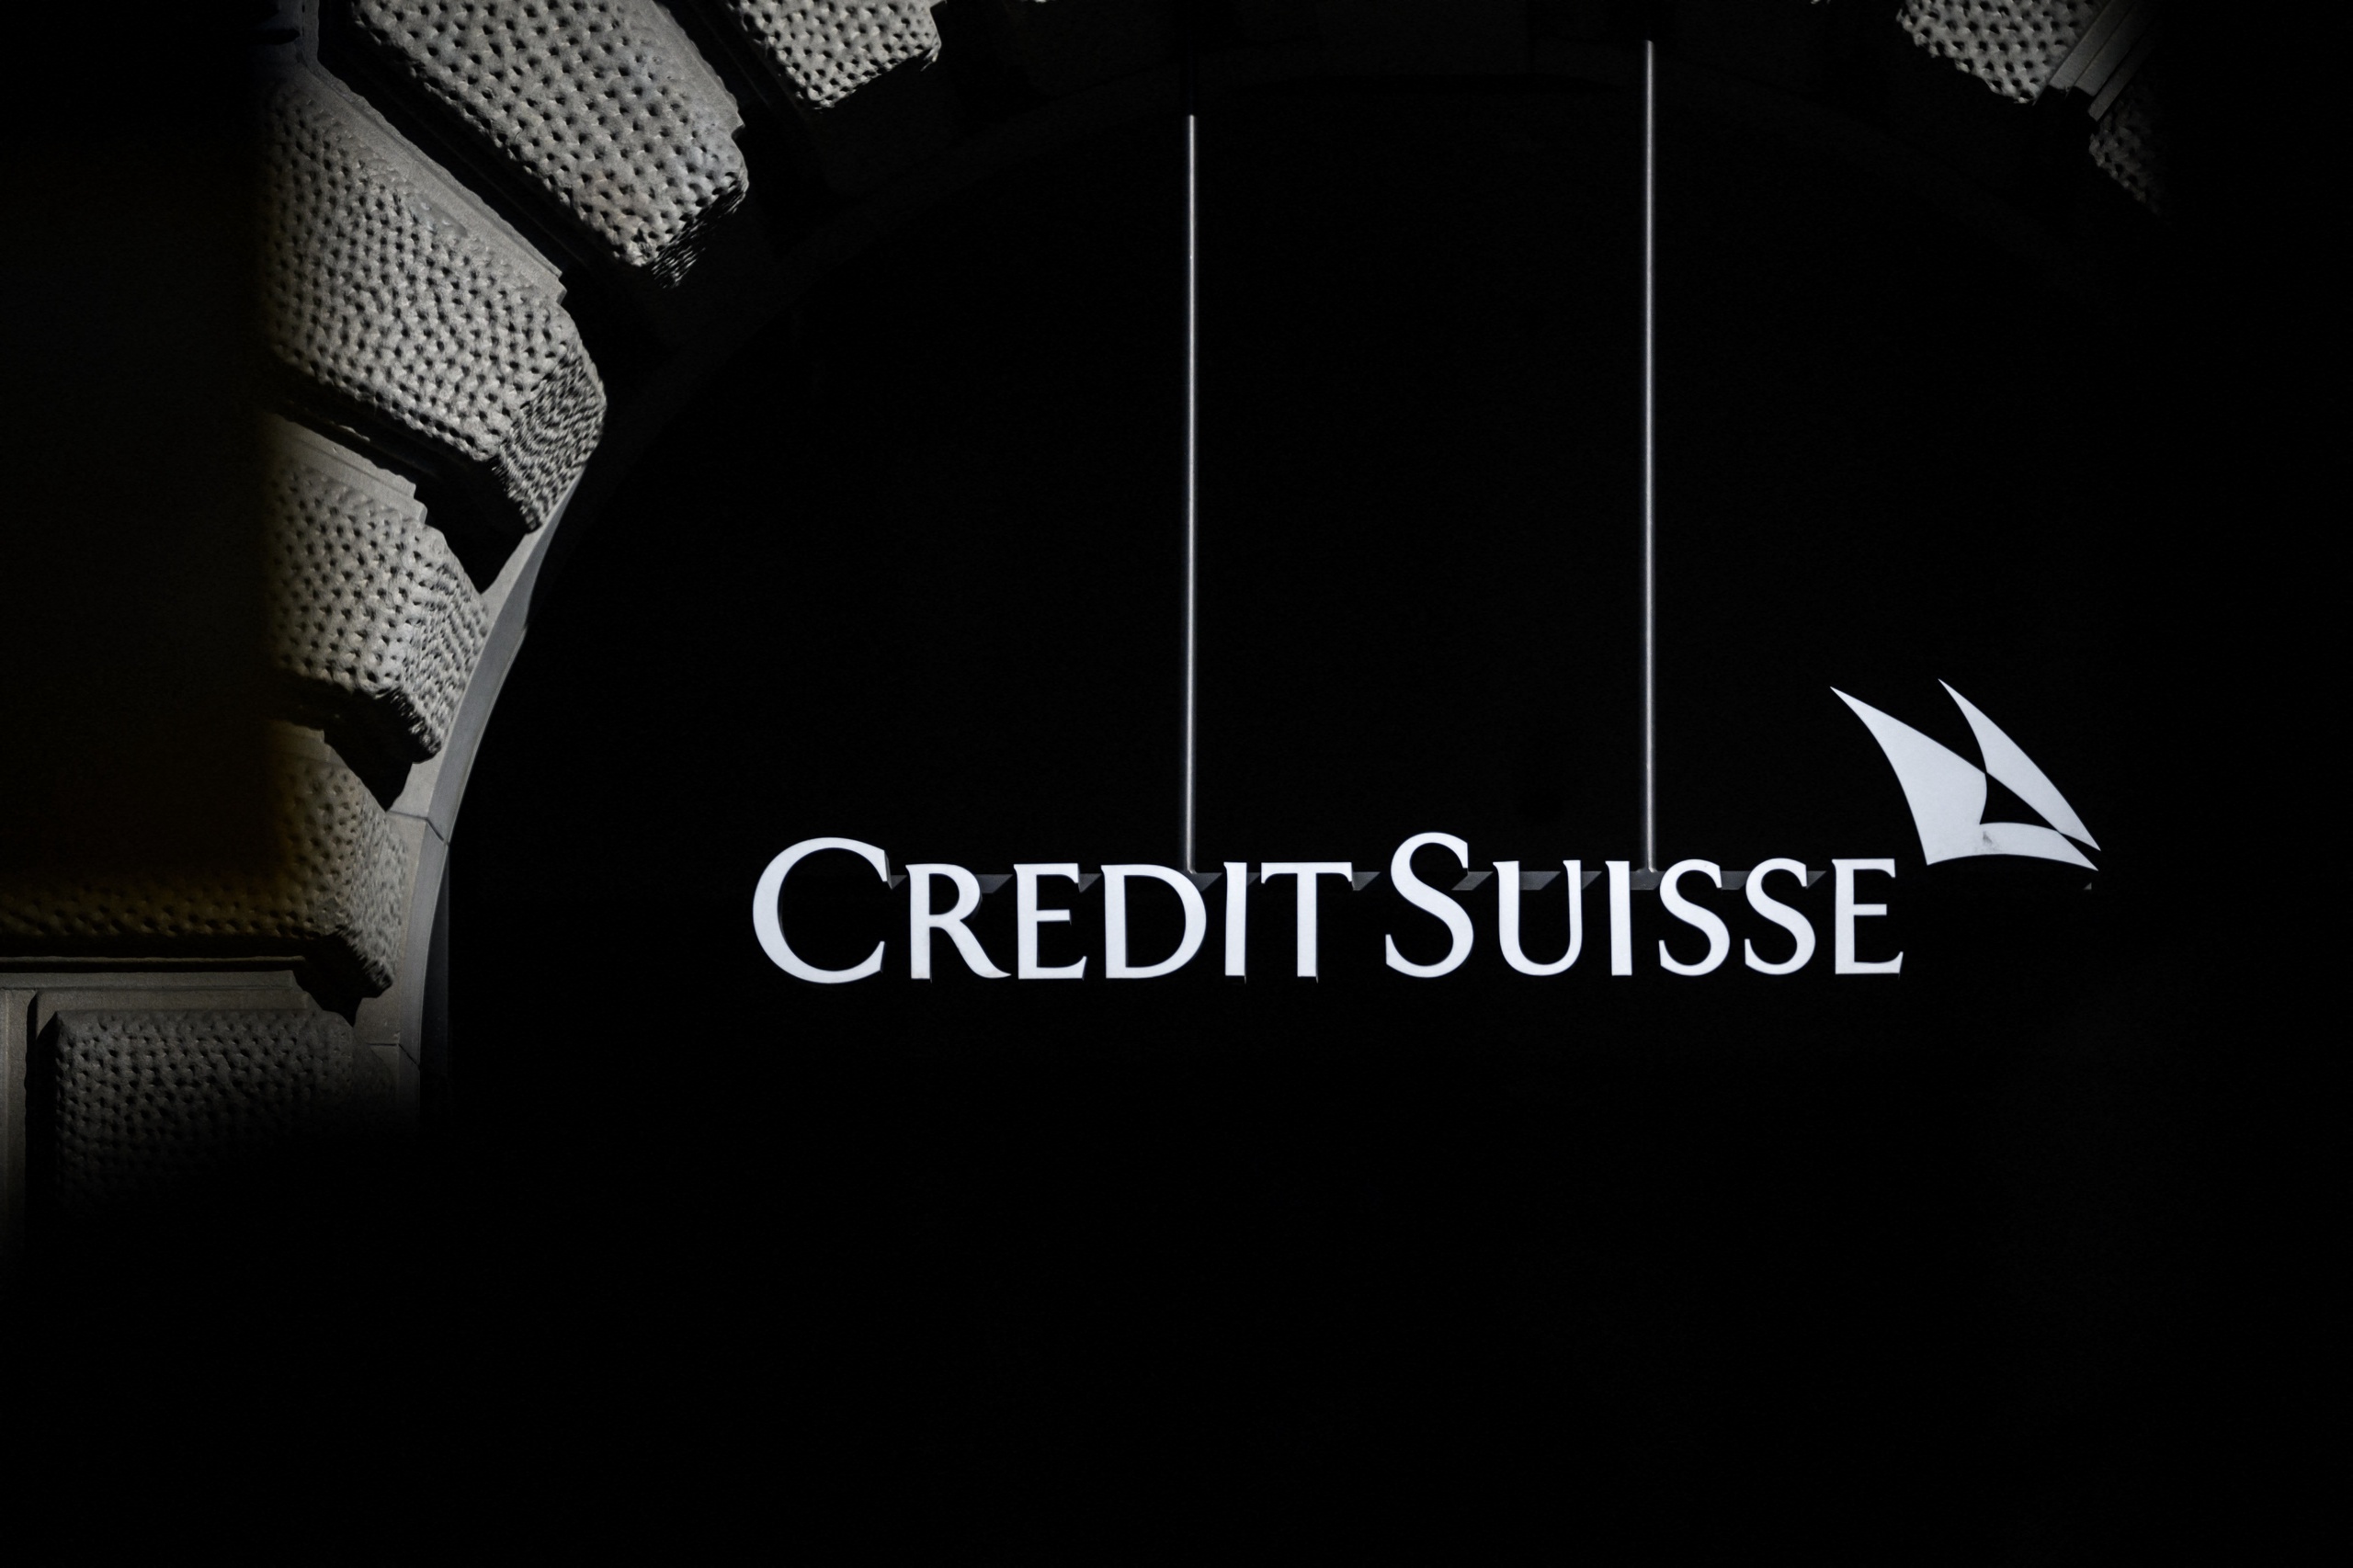 Major shareholder Harris Associates has sold all of its shares in Credit Suisse.  For more than twenty years, the asset manager had a large position in the Swiss bank, but began selling its shares in October 2022.  The final departure of Harris Associates is the next blow to Credit Suisse, which recorded an all-time low on Thursday last Thursday.